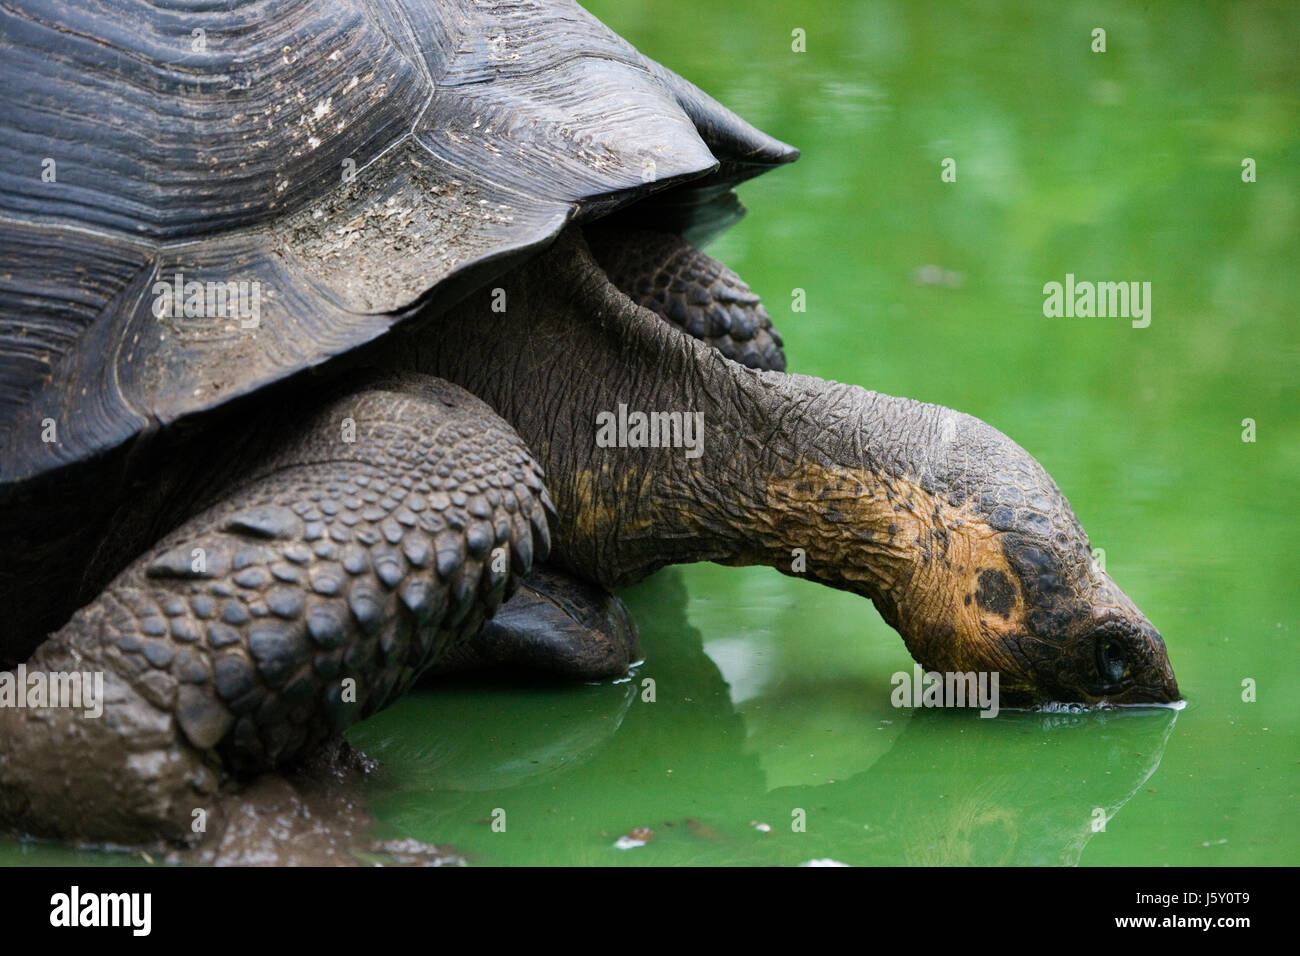 Gigantic tortoise drinks water from a puddle. The Galapagos Islands. Pacific Ocean. Ecuador. Stock Photo